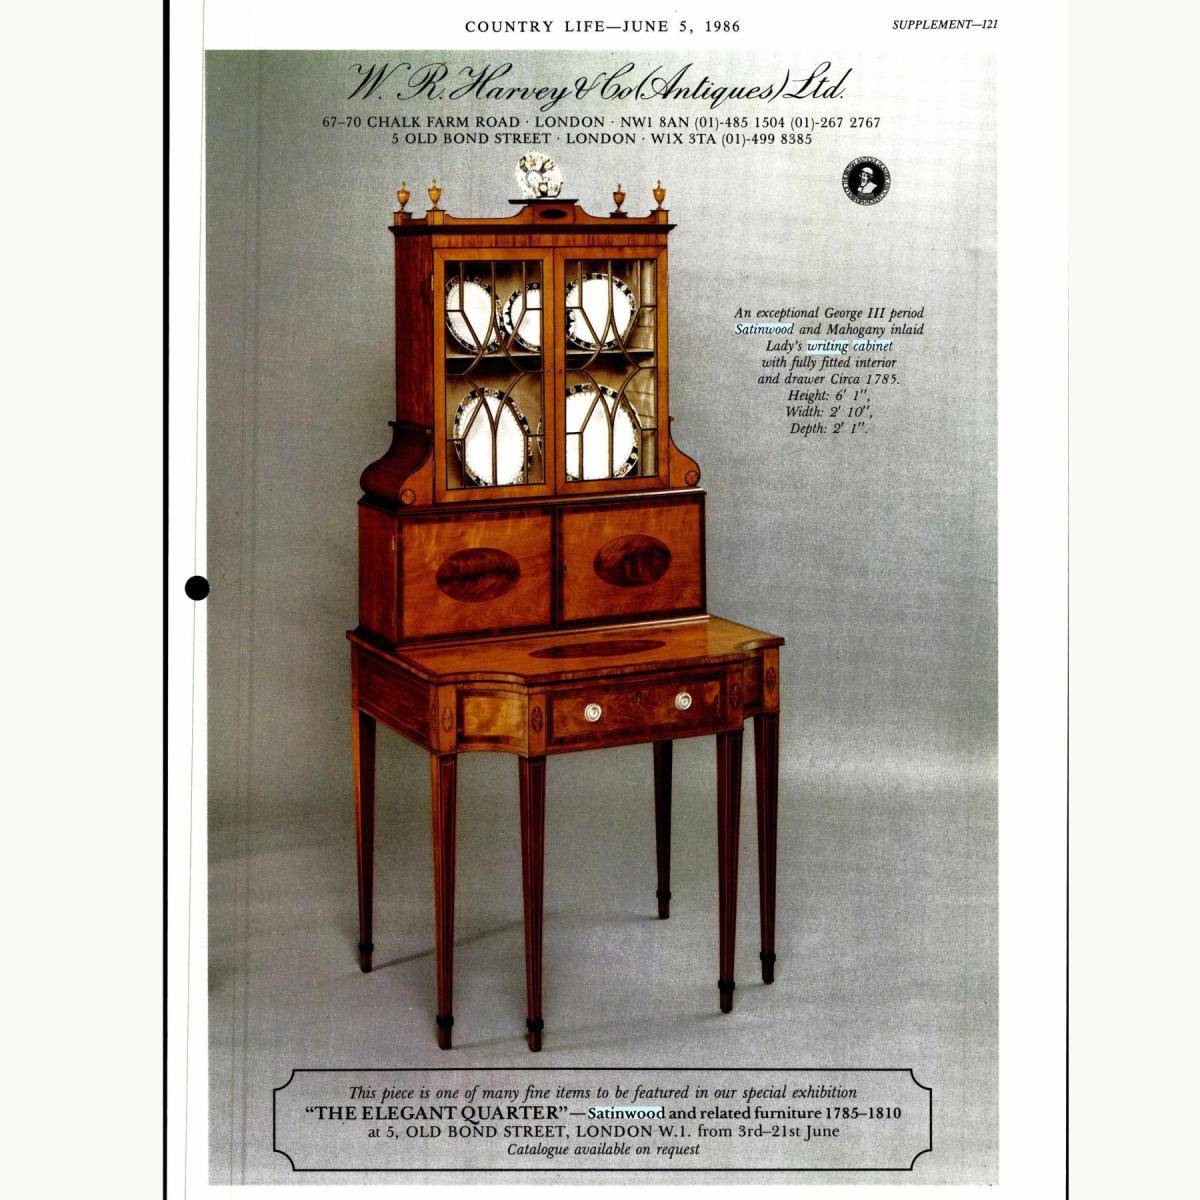 An Important 18th Century George III Satinwood and Sabicu Writing Cabinet